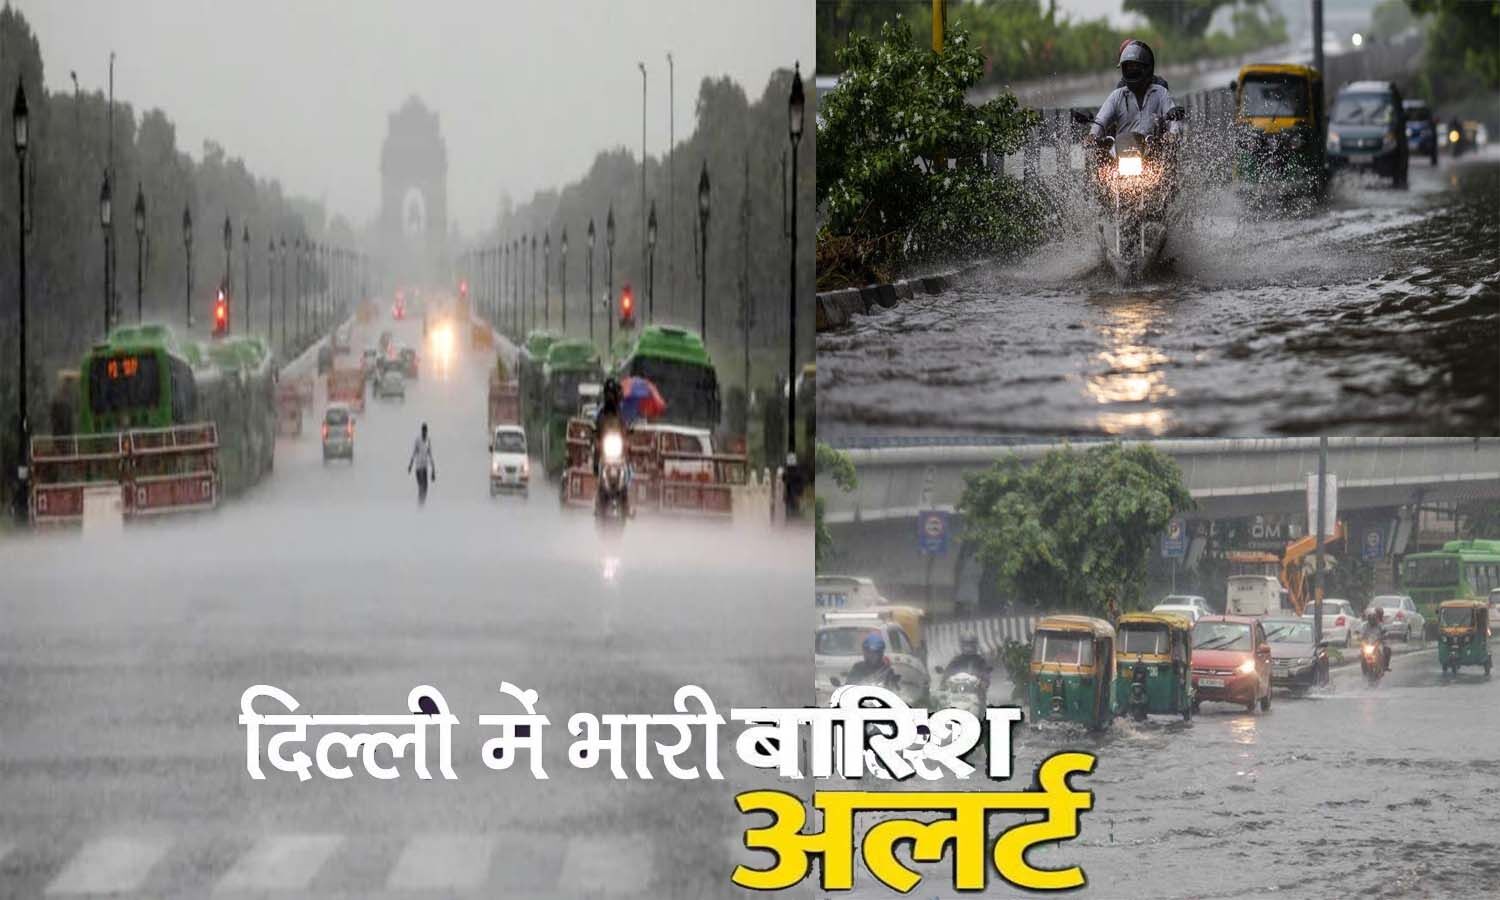 Delhi Weather Today: Today there will be terrible rain in Delhi, Meteorological Department alert issued